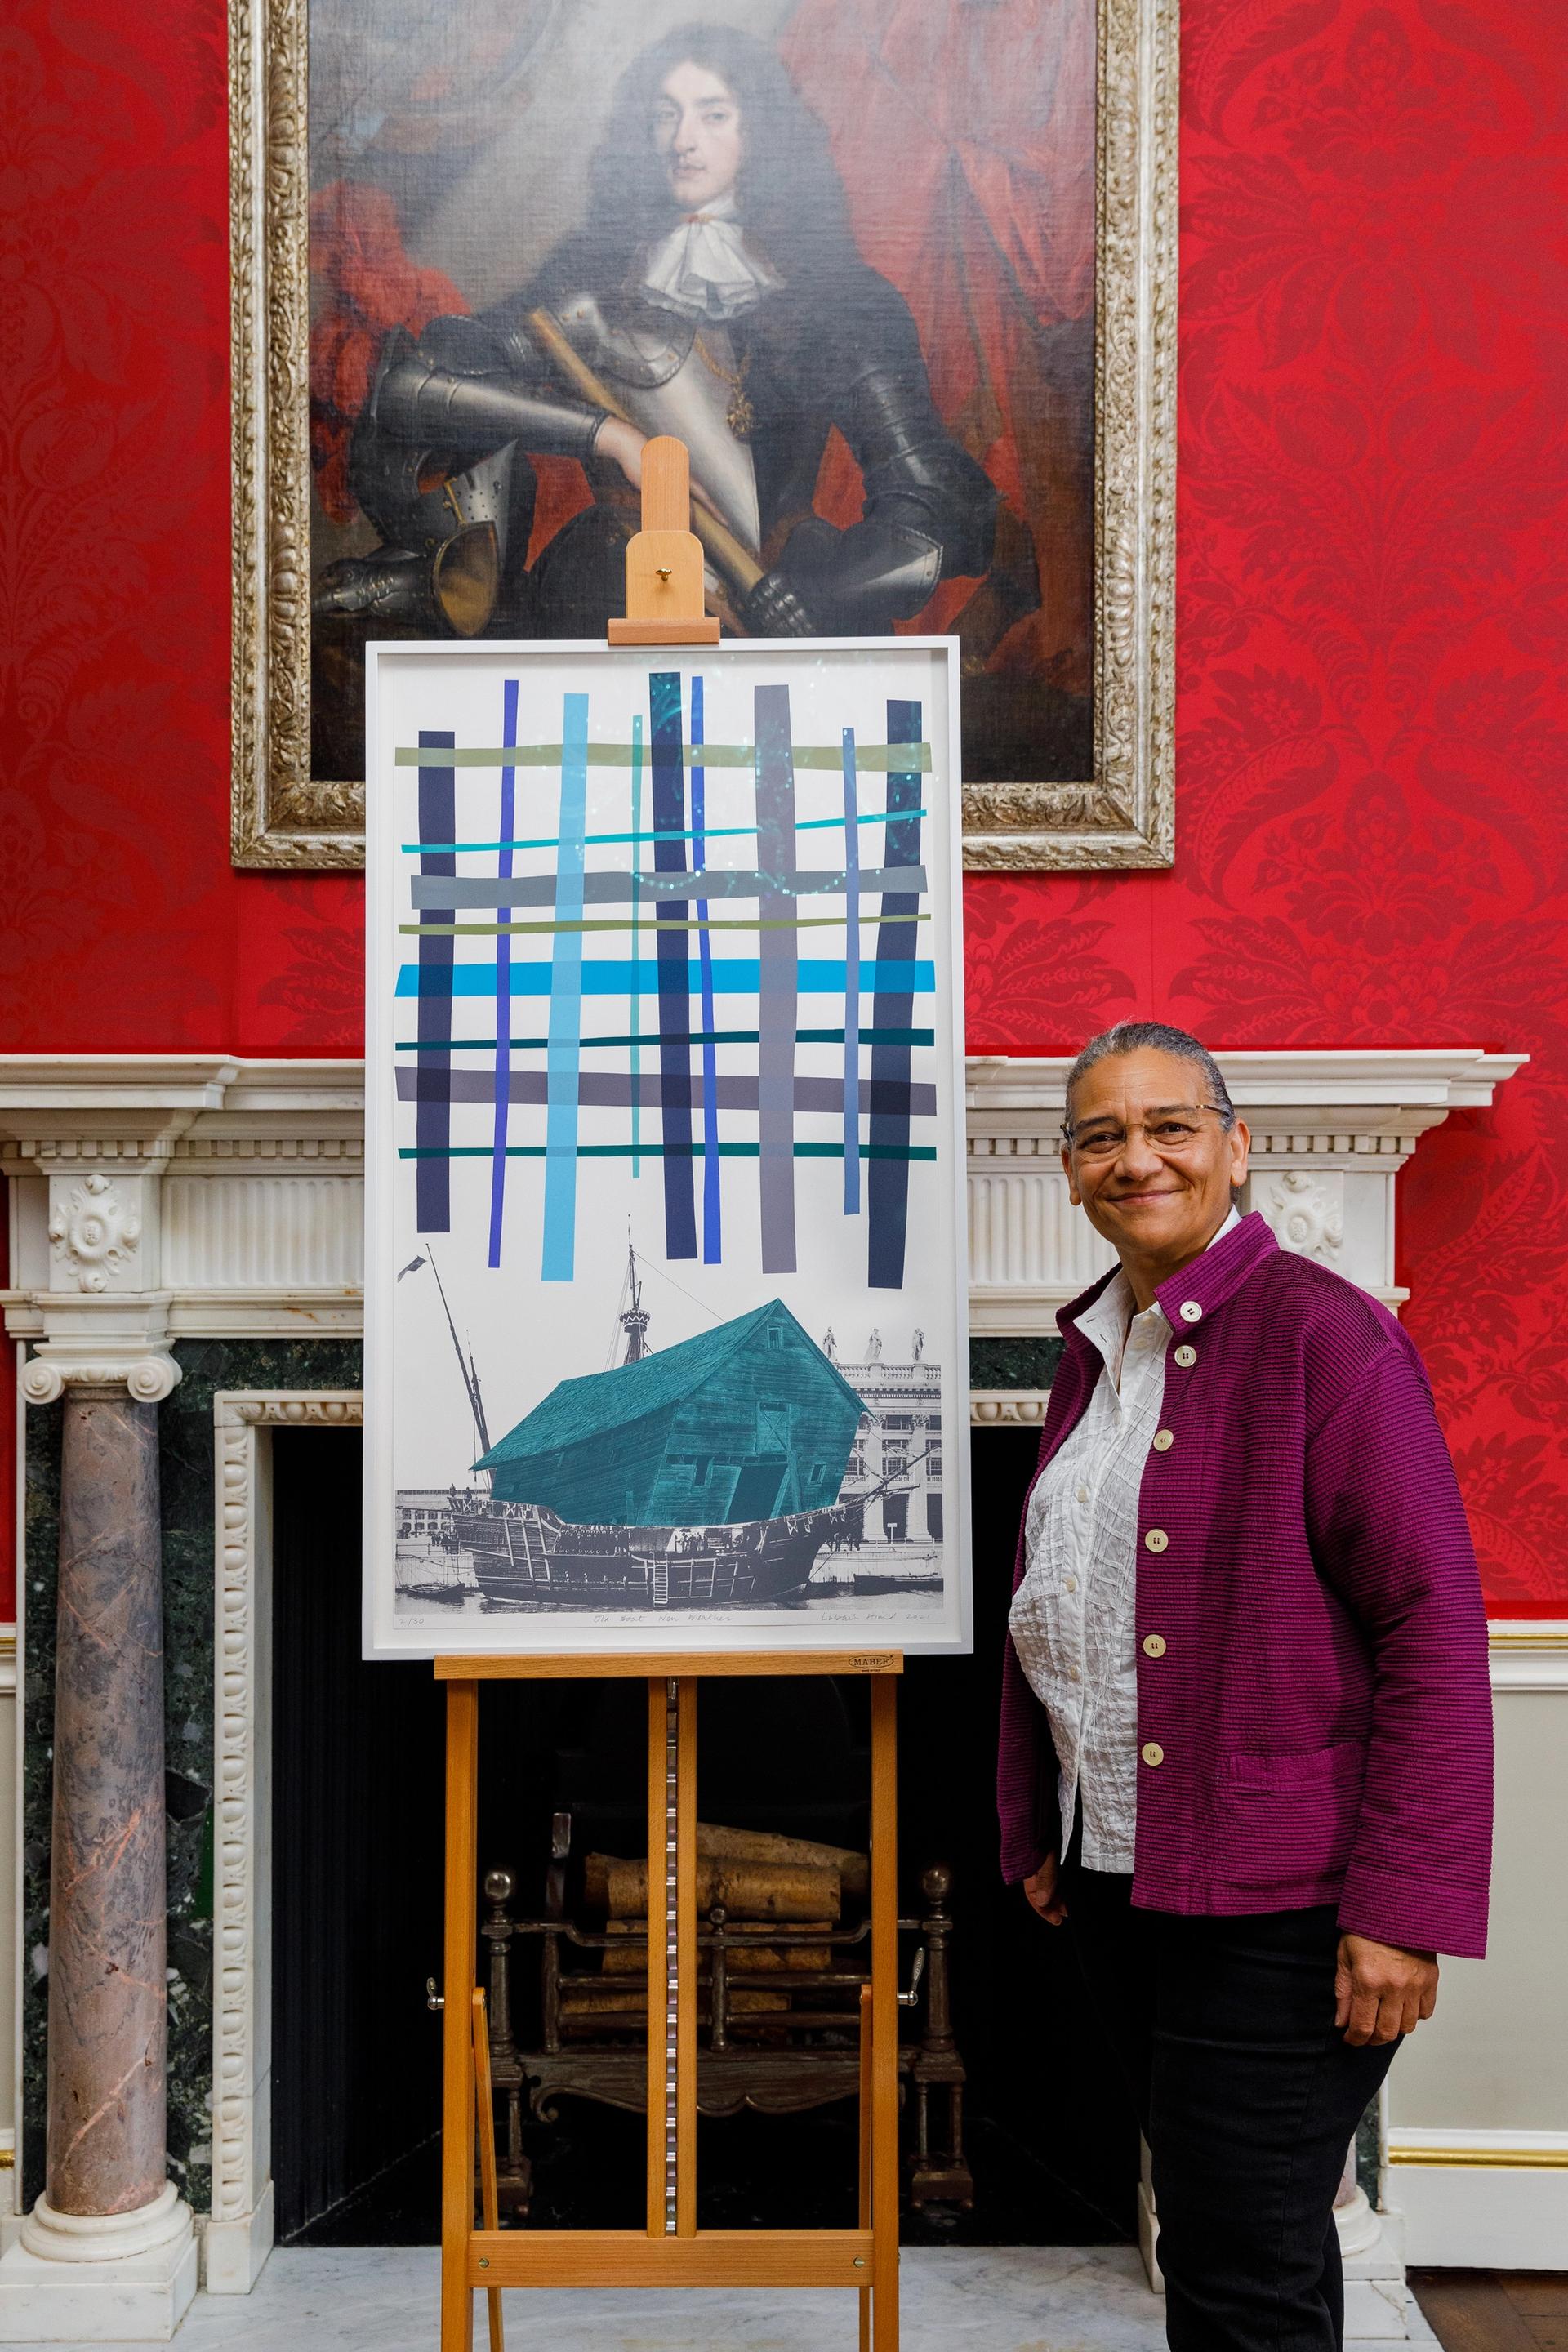 Artist Lubaina Himid has been awarded the Robson Orr TenTen Award 2021 and unveiled the new work at 11 Downing Street today Photo: Tristan Fewings/Getty Images for Outset Contemporary Art Fund